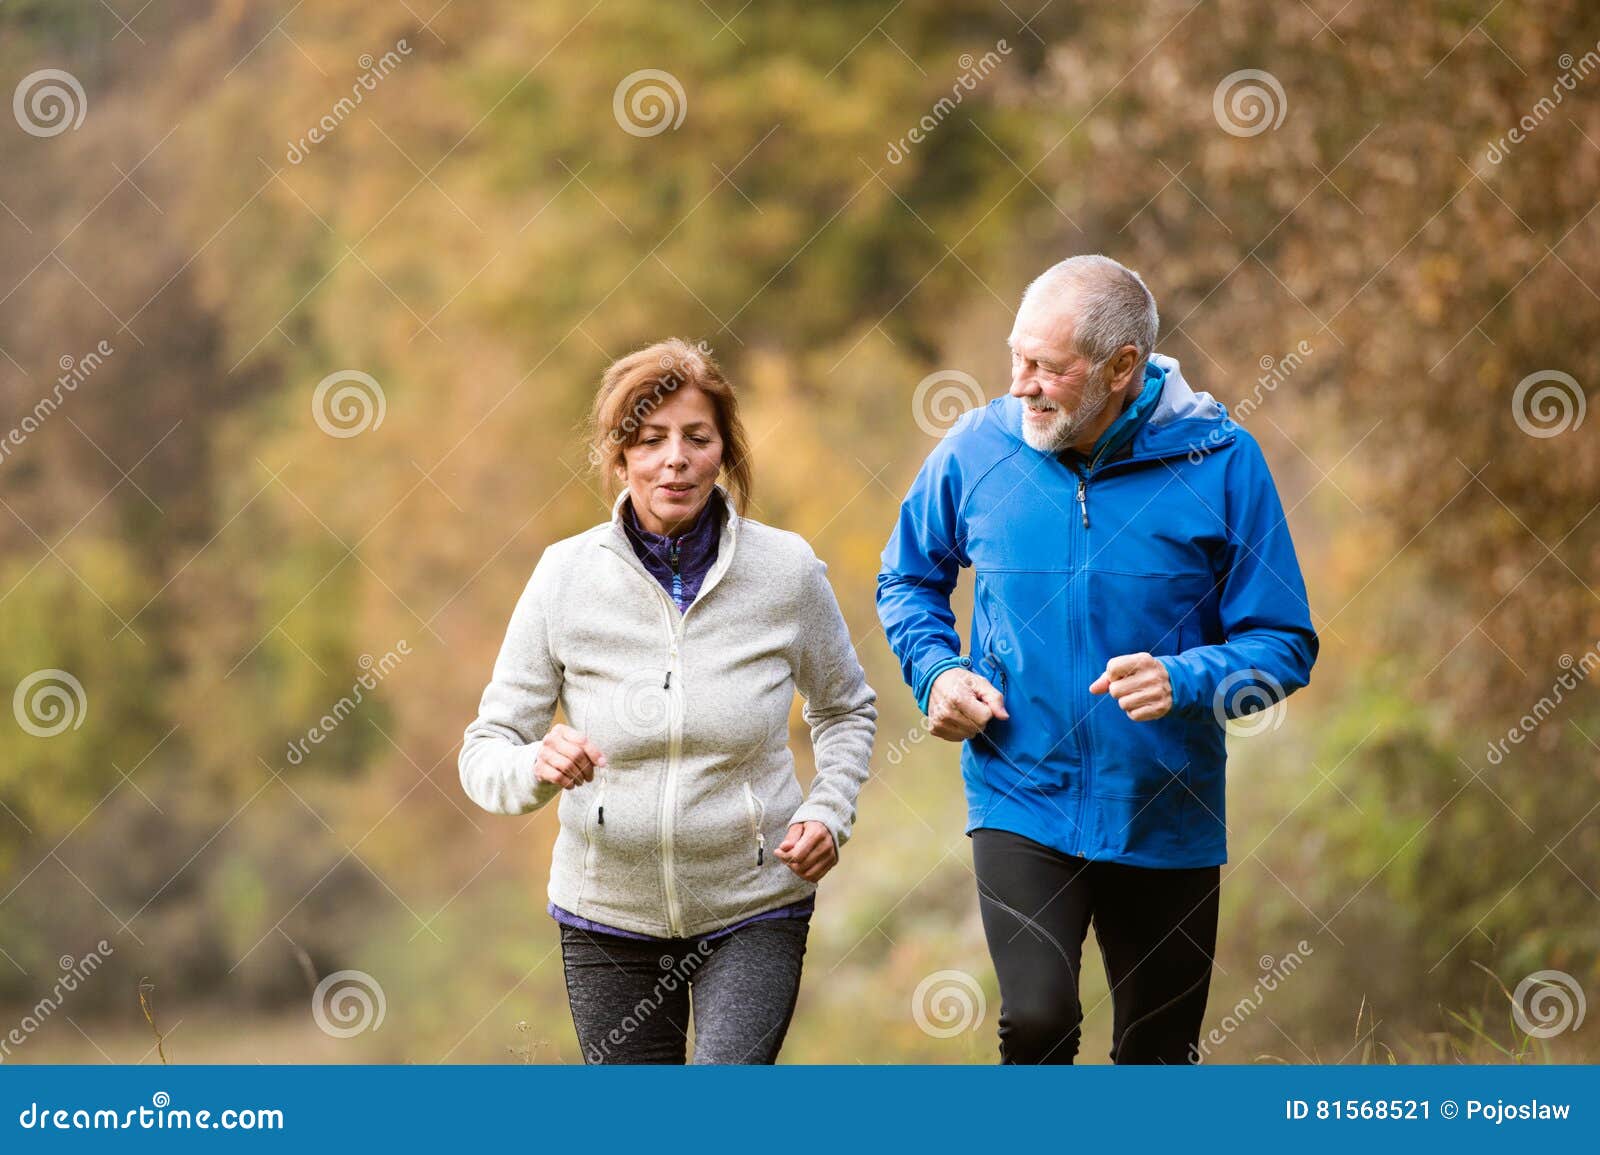 beautiful senior couple running outside in sunny autumn forest